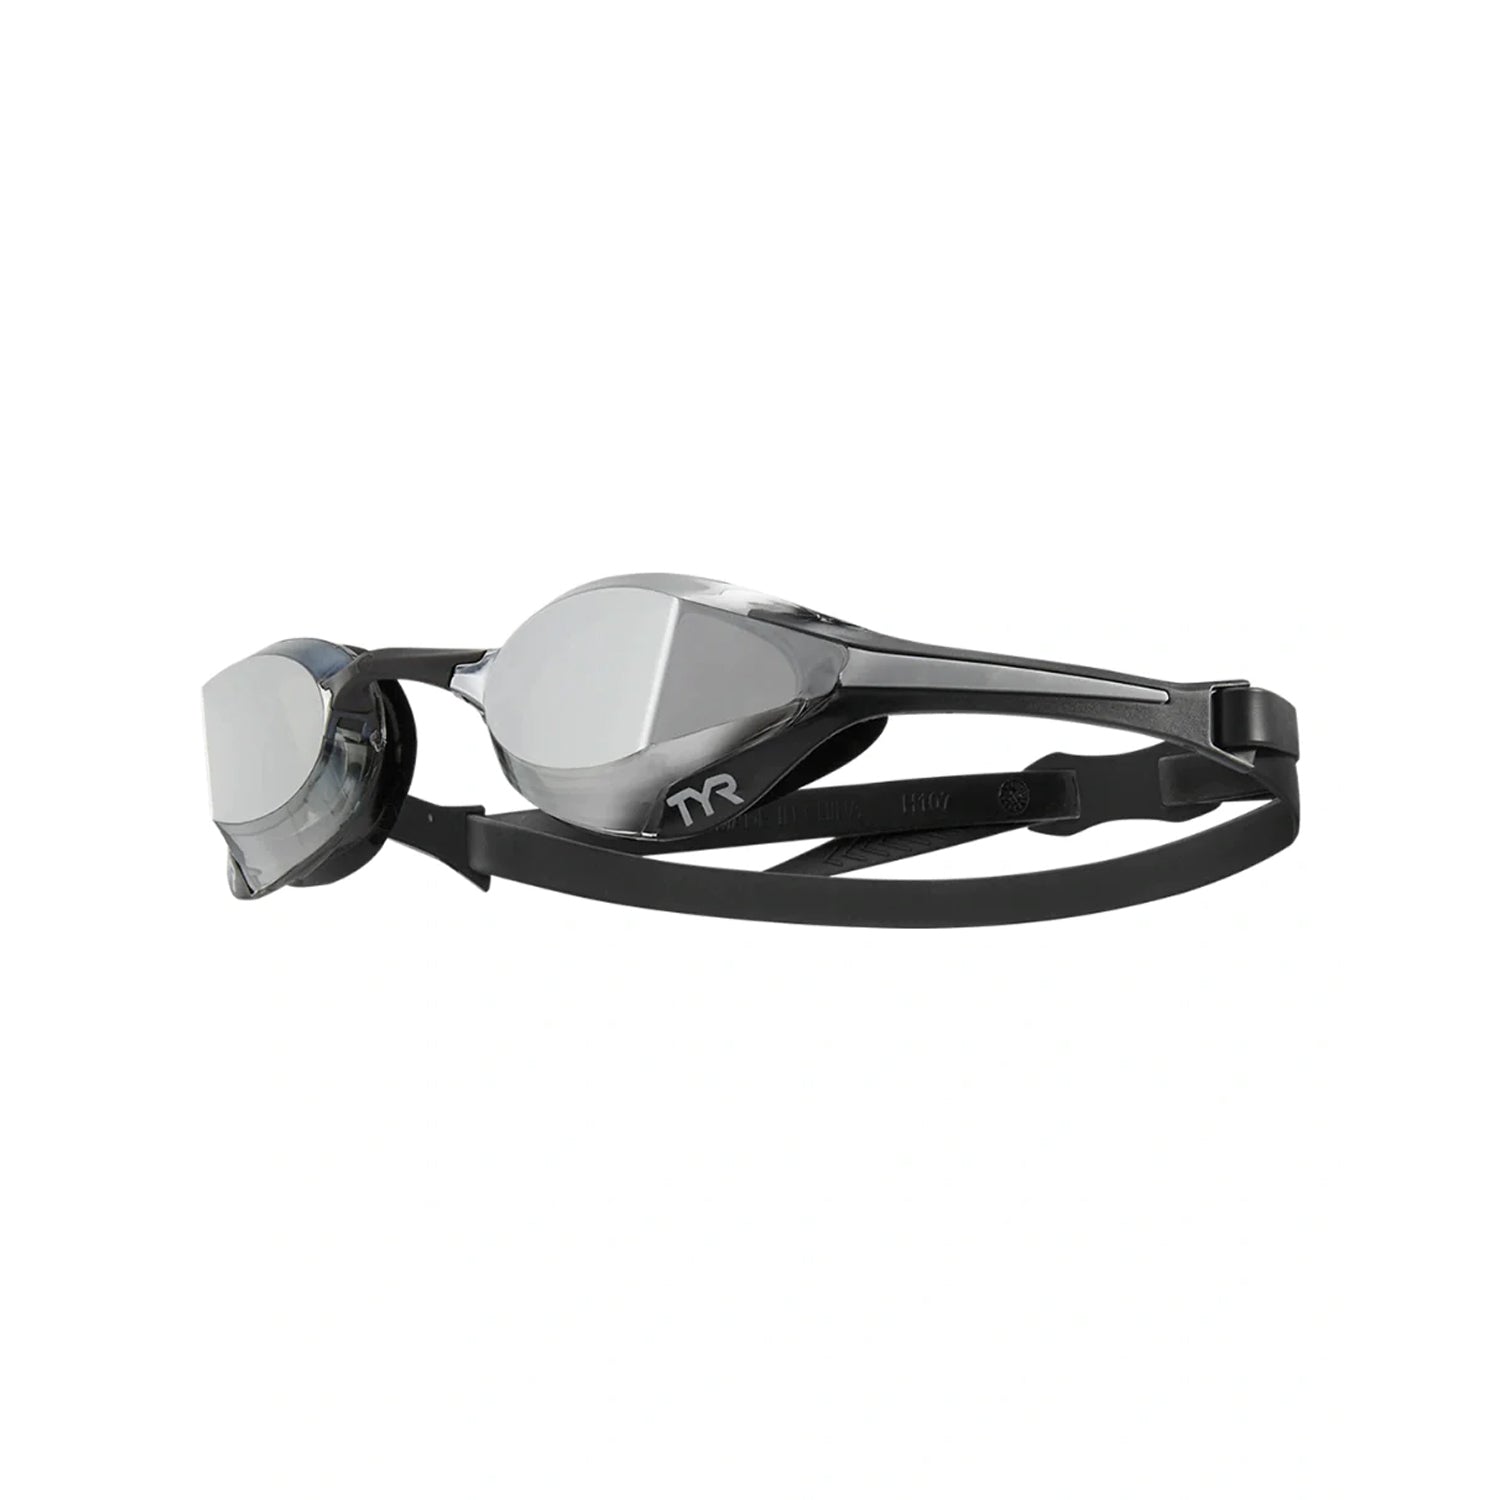 TYR Tracer X Elite Racing Mirrored Swimming Goggles - Best Price online Prokicksports.com